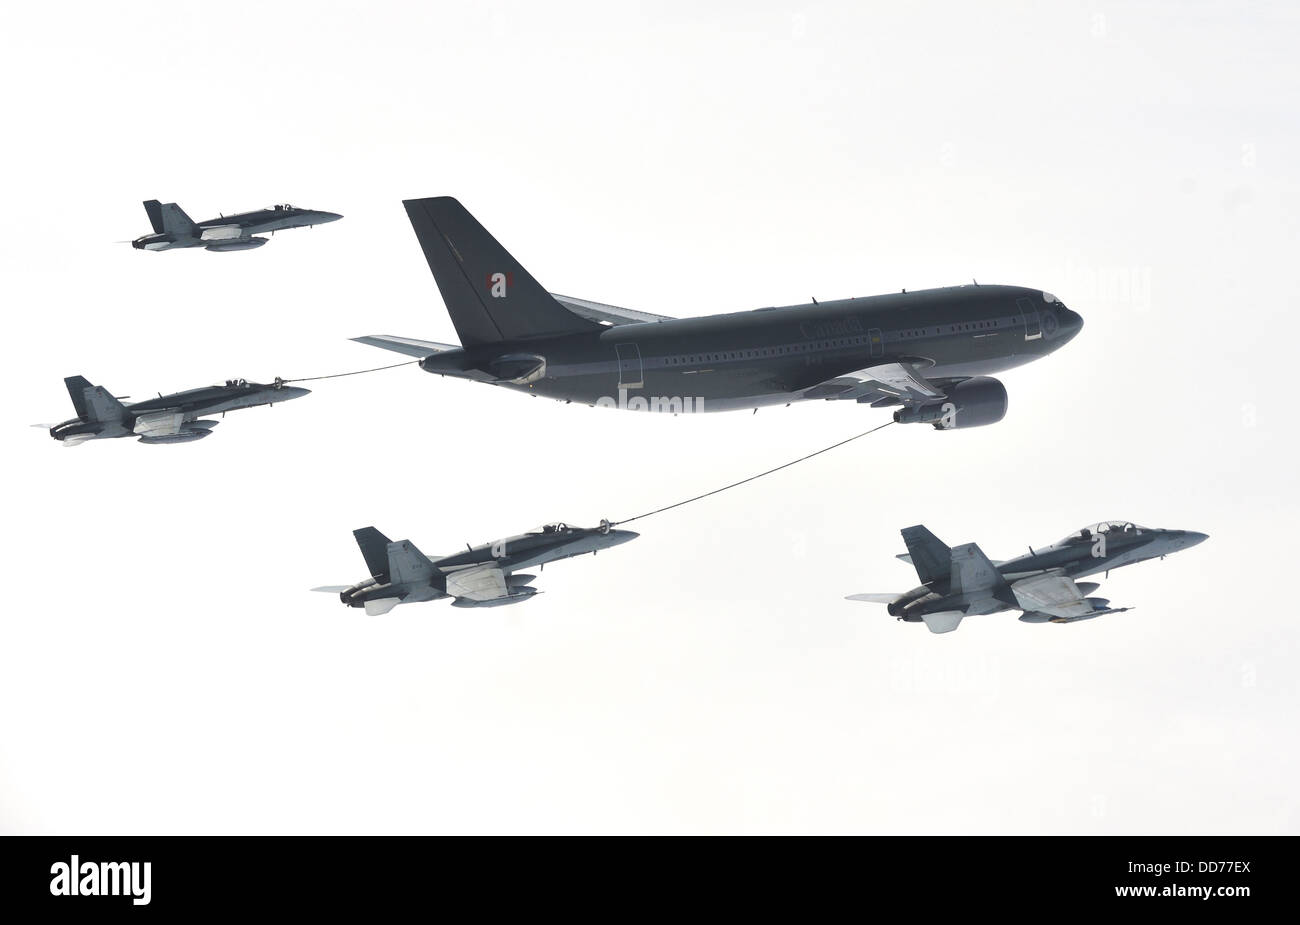 A Canadian Air Force CC-150 Polaris Airbus refueling aircraft from 437 Squadron Trenton provides air-to-air refueling to Canadian CF-18 Hornet fighter aircraft from 409 Squadron August 25, 2013 over Ottawa, Canada. Stock Photo